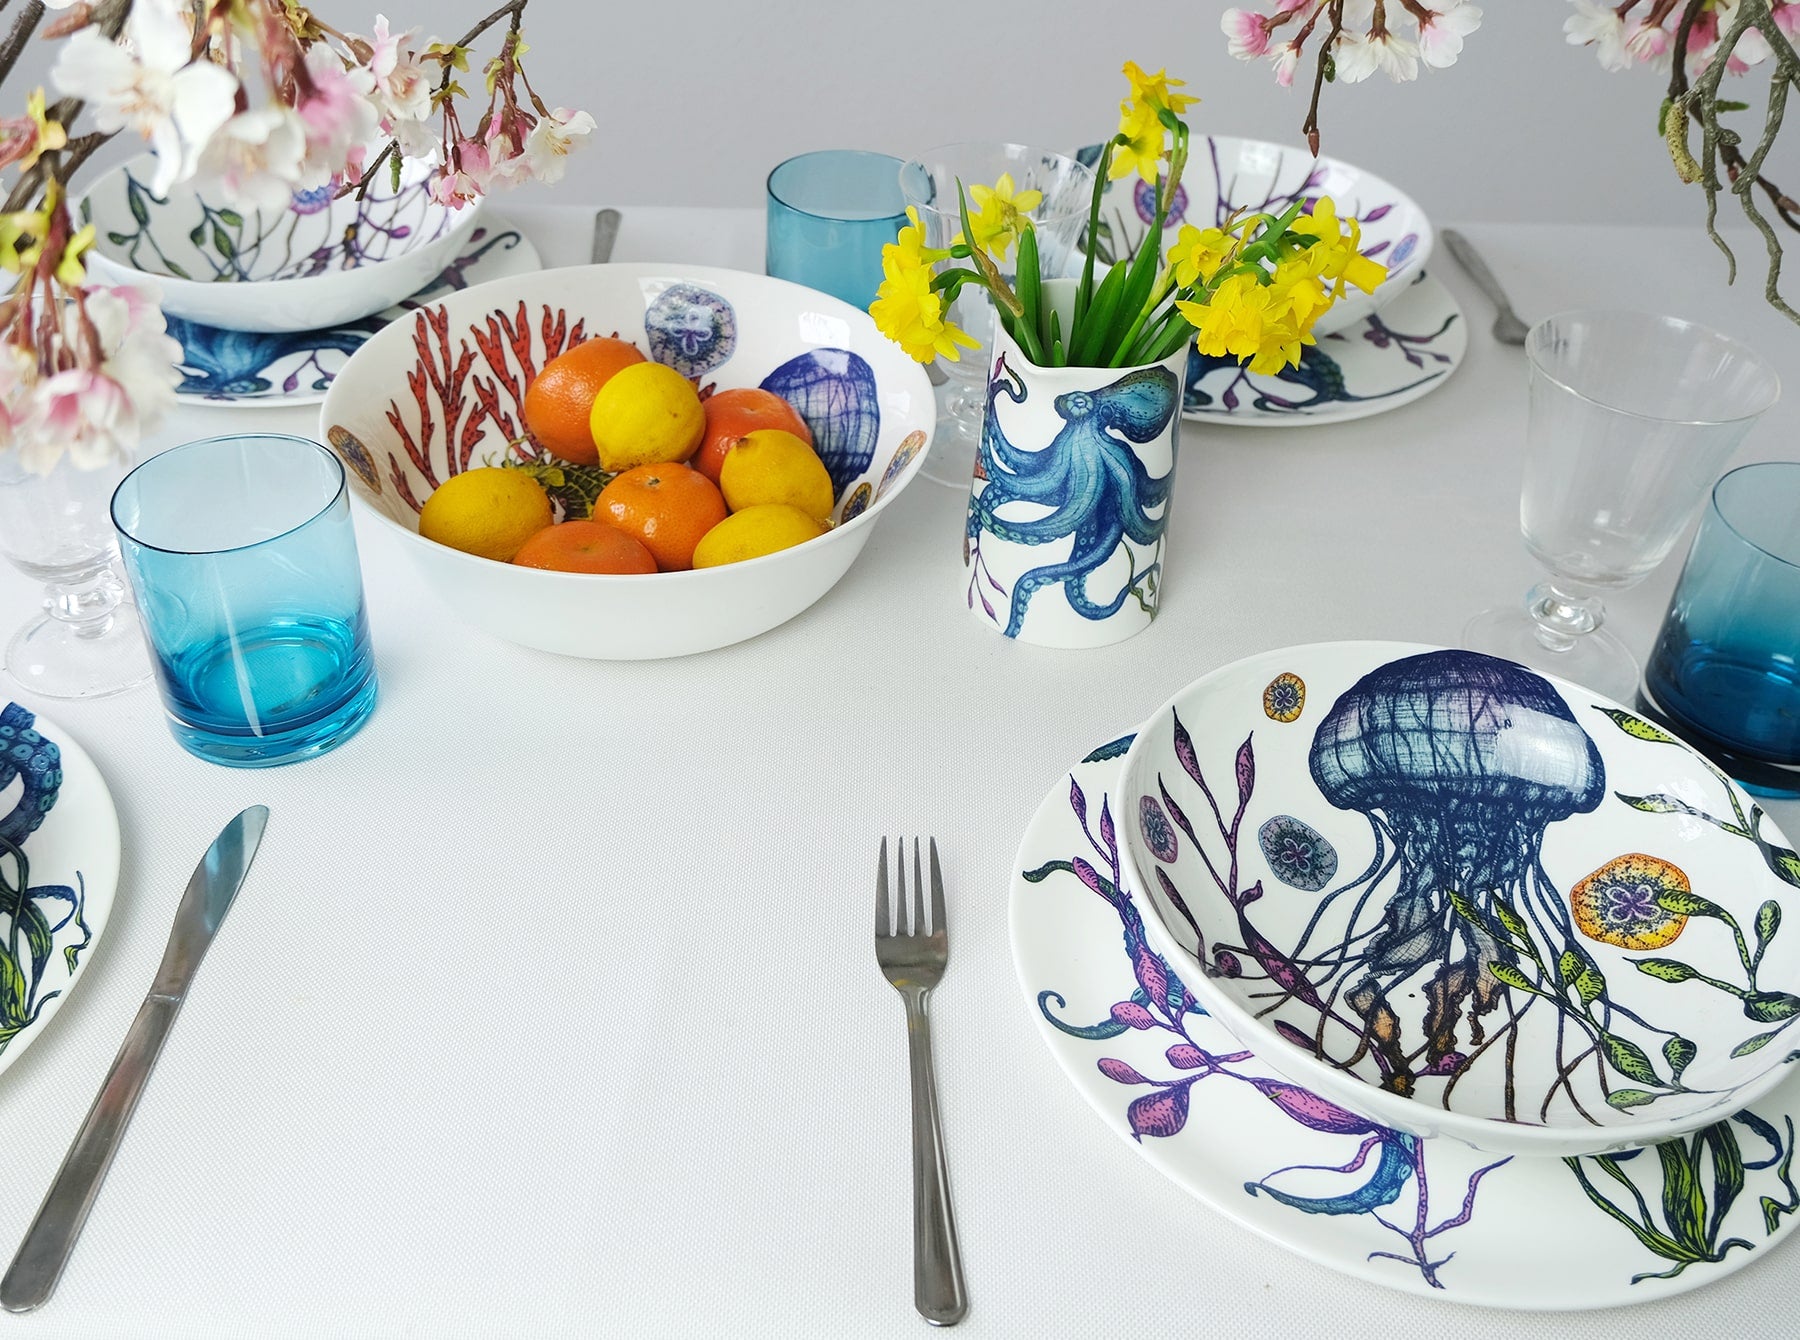 Pasta bowl in Bone China in our Reef range in Navy and white in the brightly coloured Jellyfish design,placed on a Reef Octopus plate on a table.Next to this is are other pieces from the Reef range with brightly coloured fruit and daffodils in a vase.